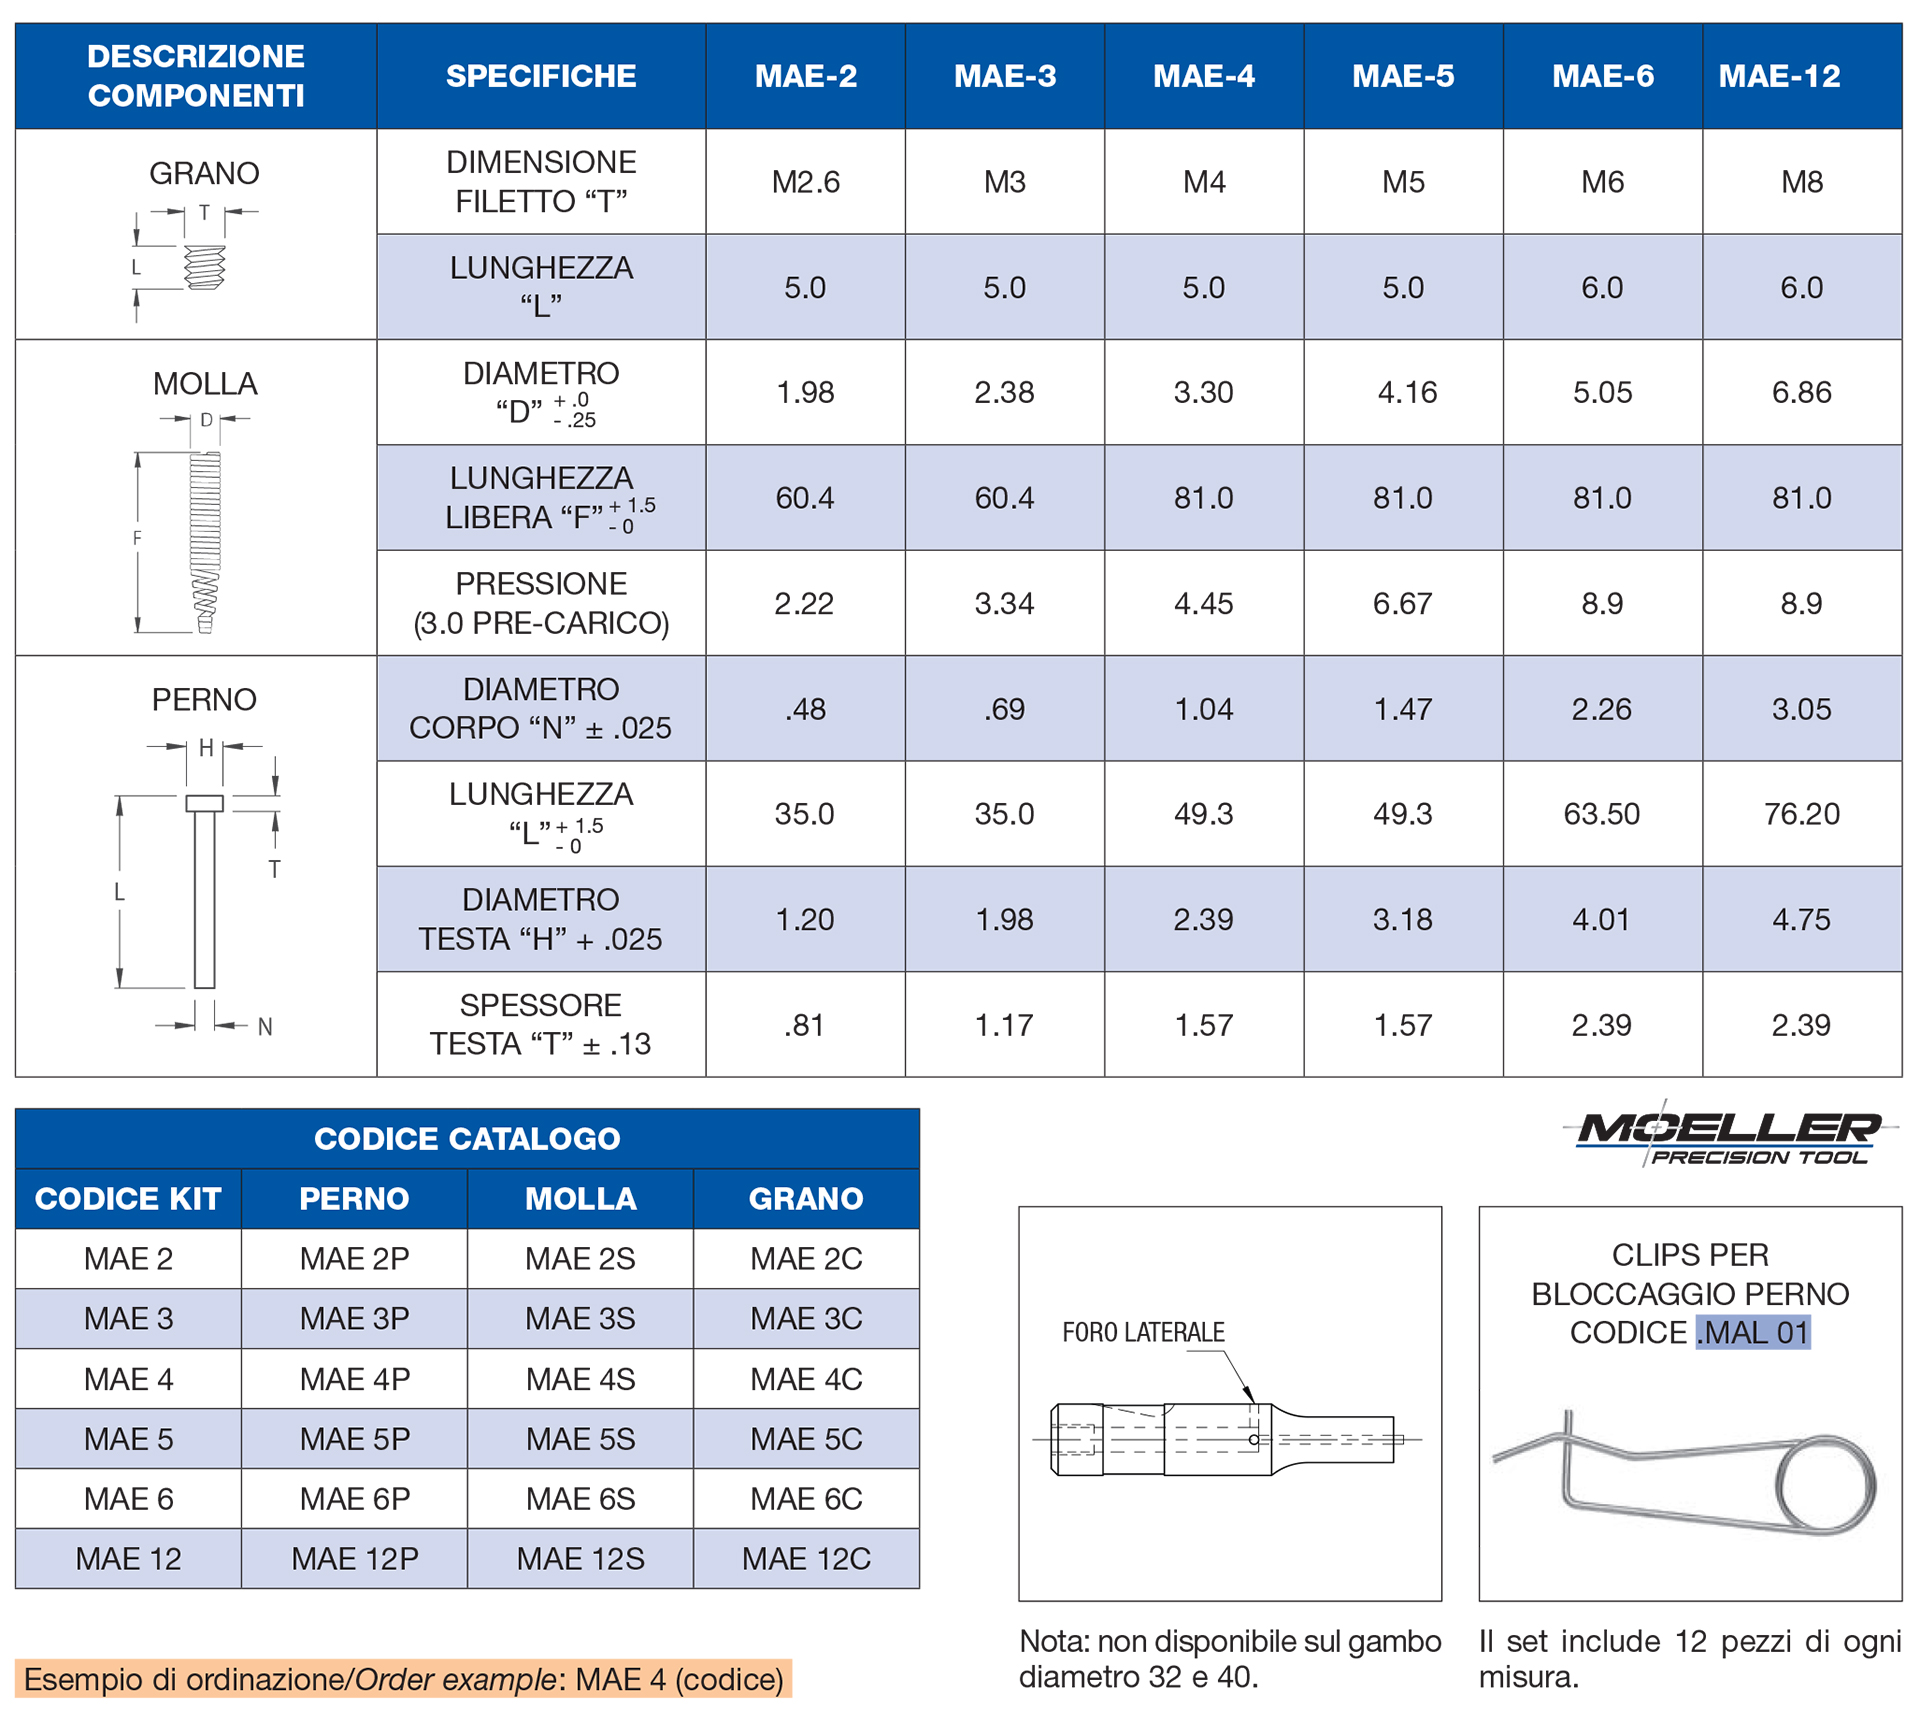 Ejector component specifications